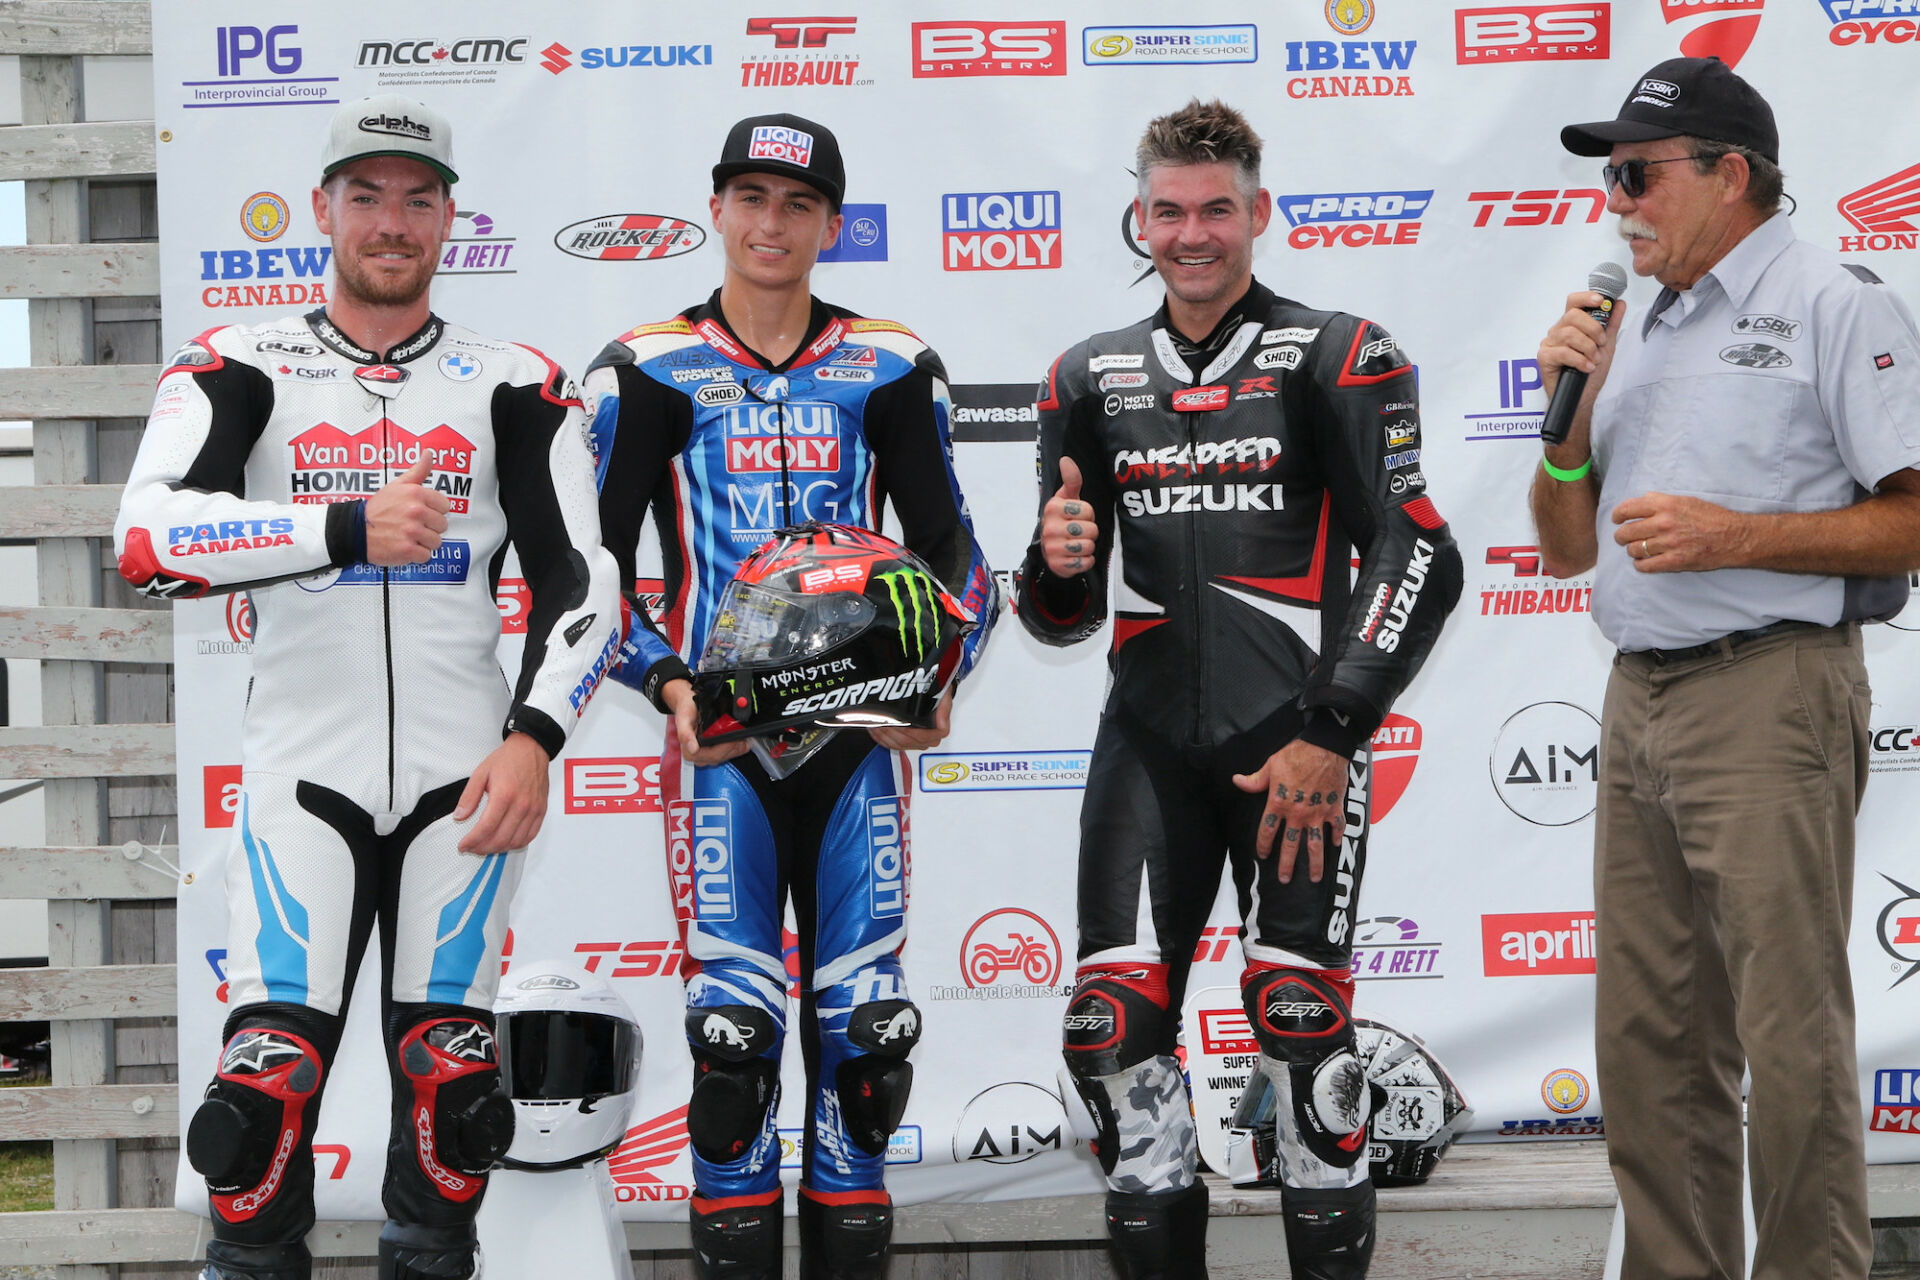 Canadian Superbike racers (from left) Ben Young, Alex Dumas, and Trevor Daley join series announcer Frank Wood in announcing the Canadian Rider Fund raffle of a Fabio Quartararo-autographed Scorpion race helmet, at Atlantic Motorsport Park. Photo by Rob O'Brien, courtesy CSBK/PMP.